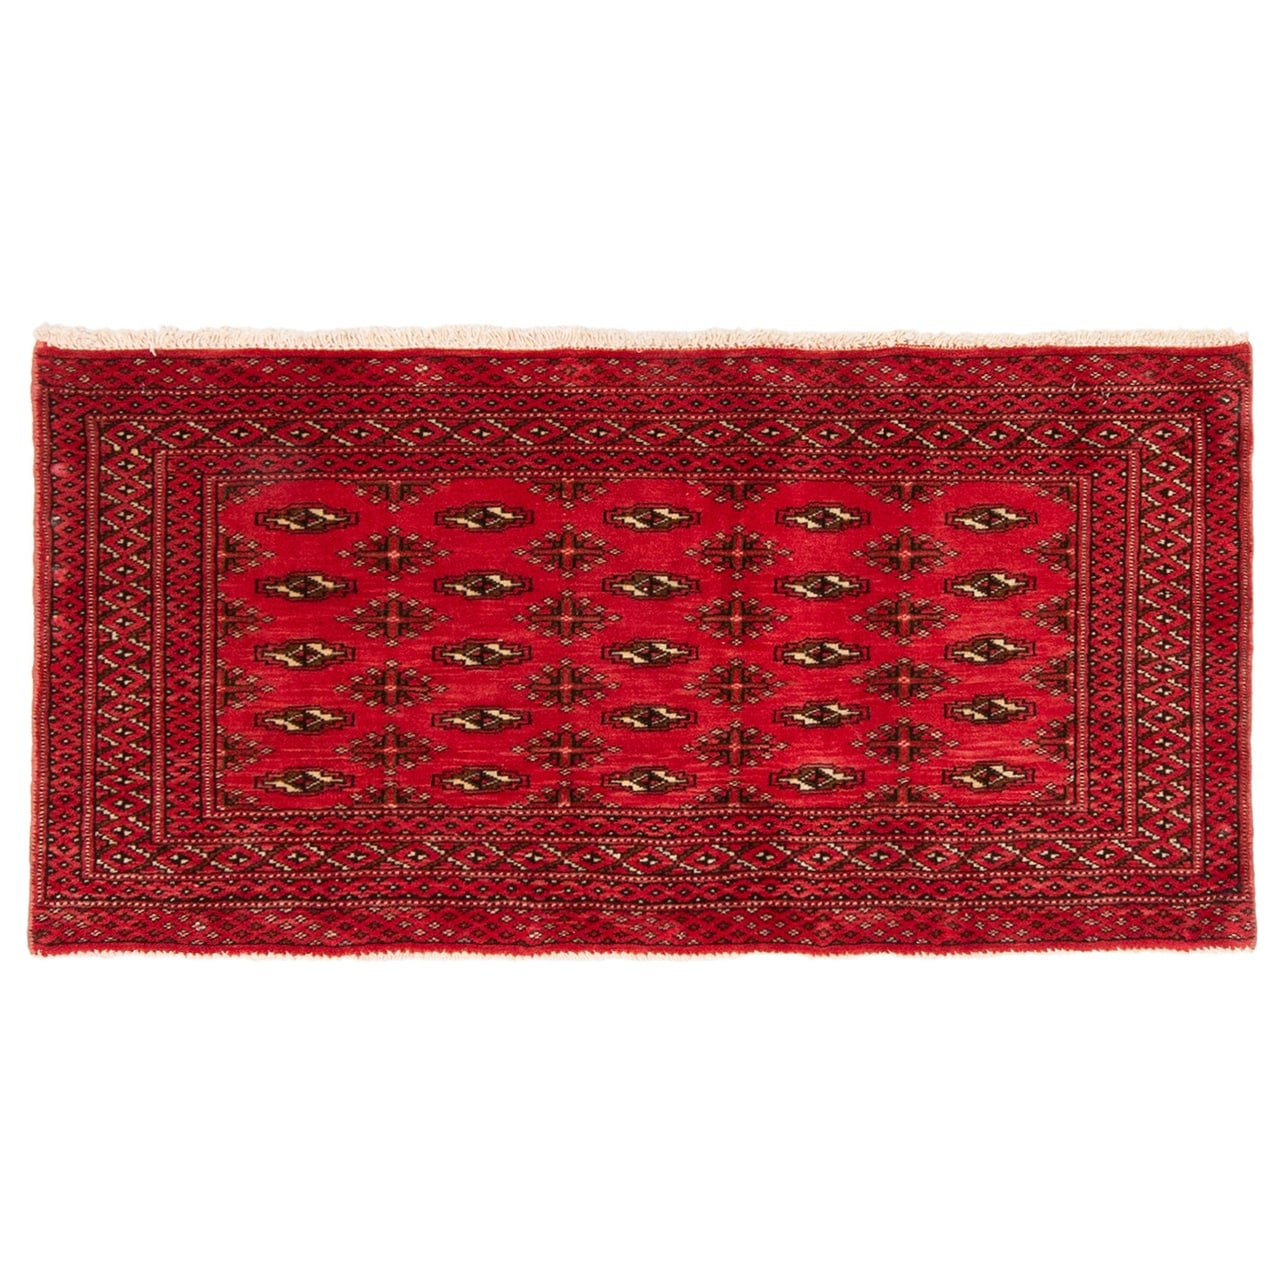 Finest Peshawar Bokhara Bordered Red Rug 3'2 x 5'1 Bedroom Hand-Knotted Wool Rug eCarpet Gallery Area Rug for Living Room 304762